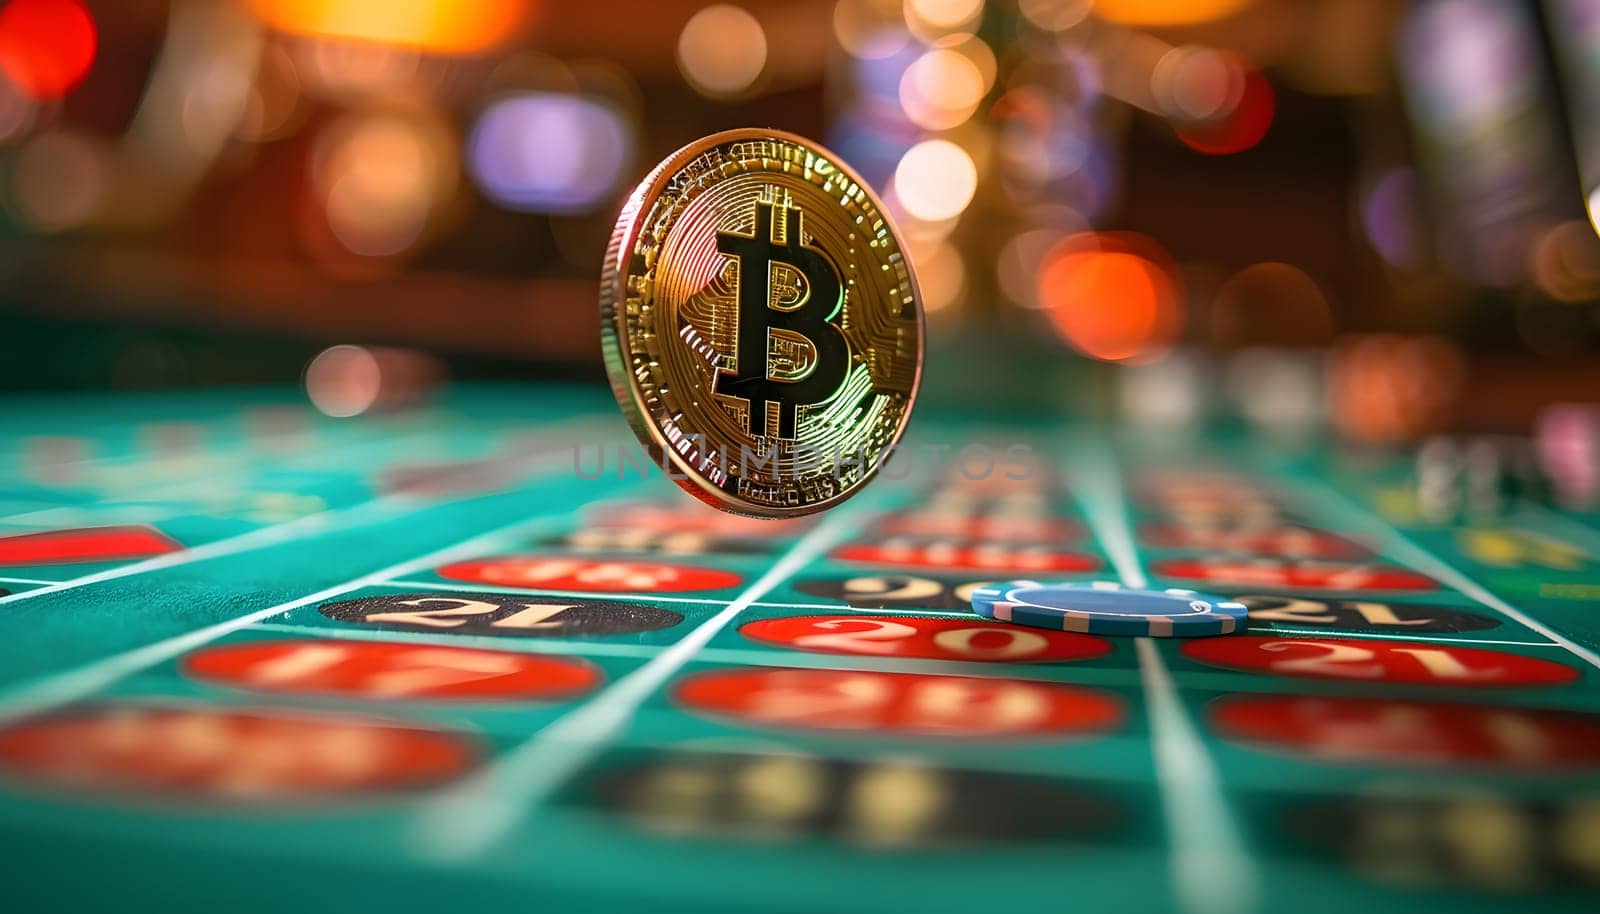 An electric blue bitcoin coin adds colorfulness to the roulette table, creating a circle of entertainment in the midst of indoor games and sports